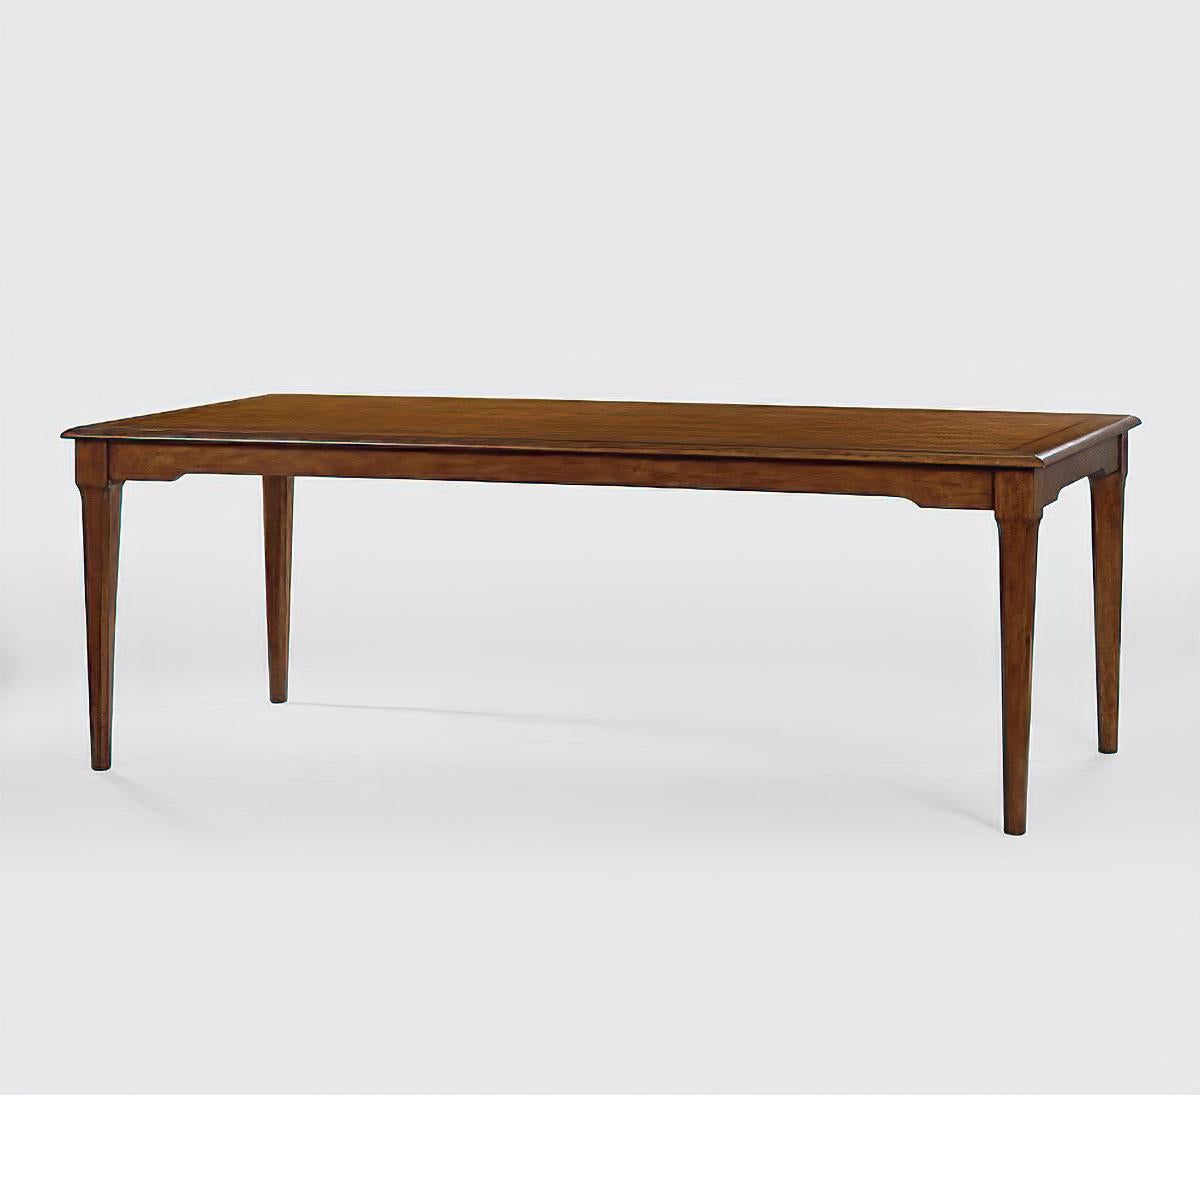 Neoclassical Classic Rustic Dining Table For Sale